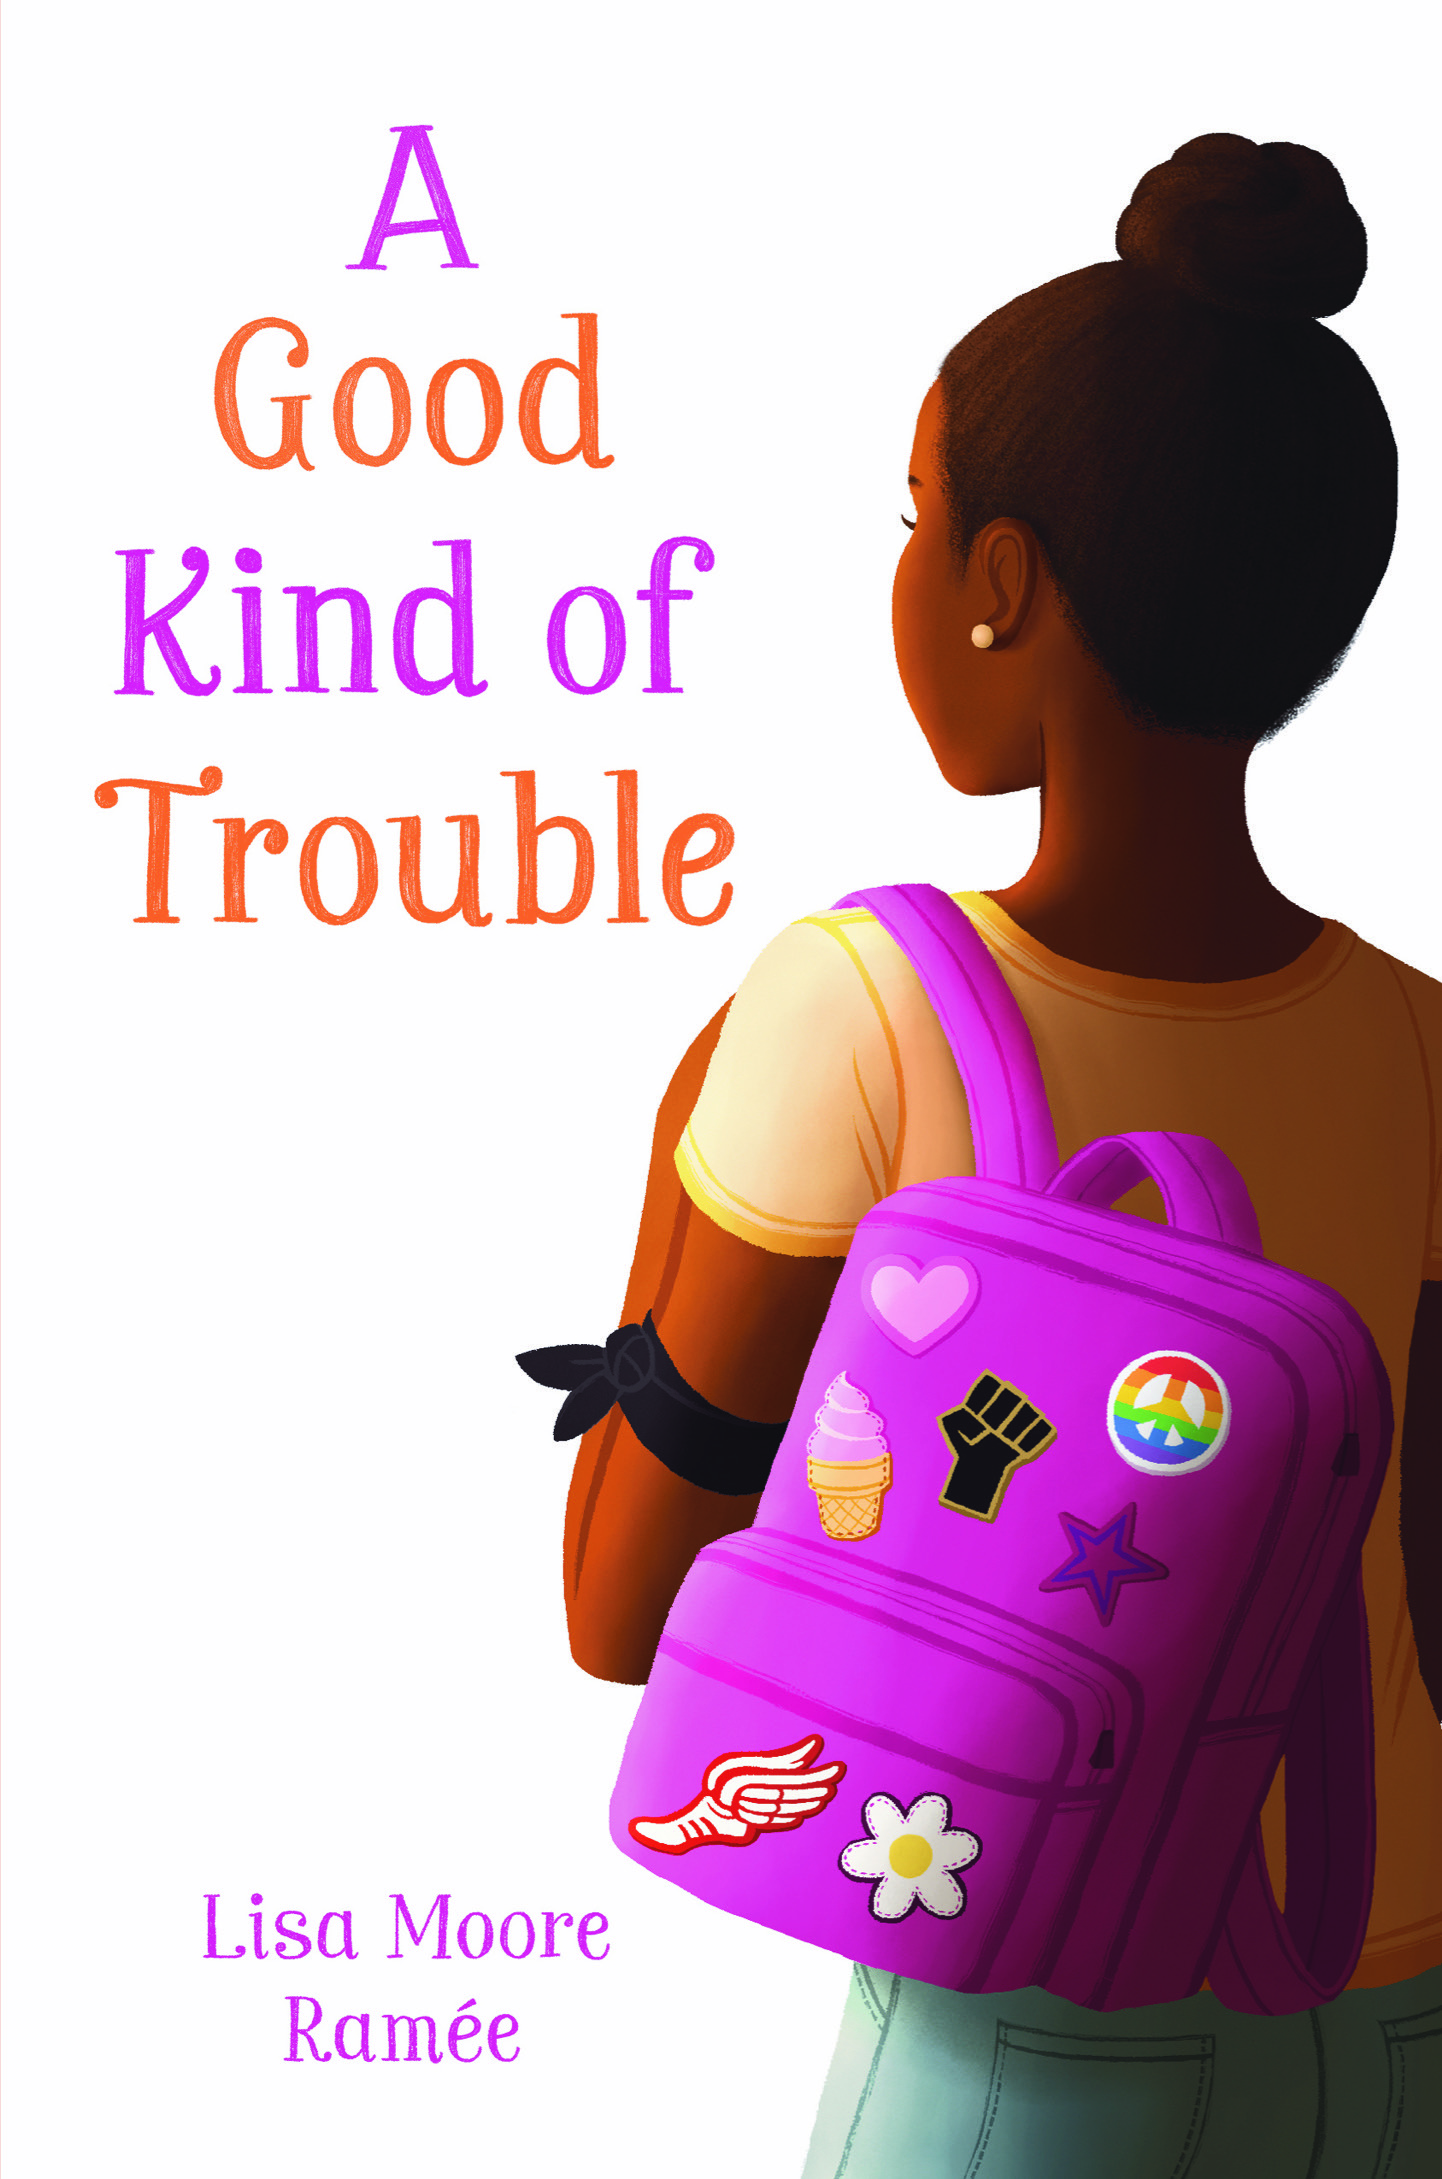 A Good Kind of Trouble by Lisa Moore Rame